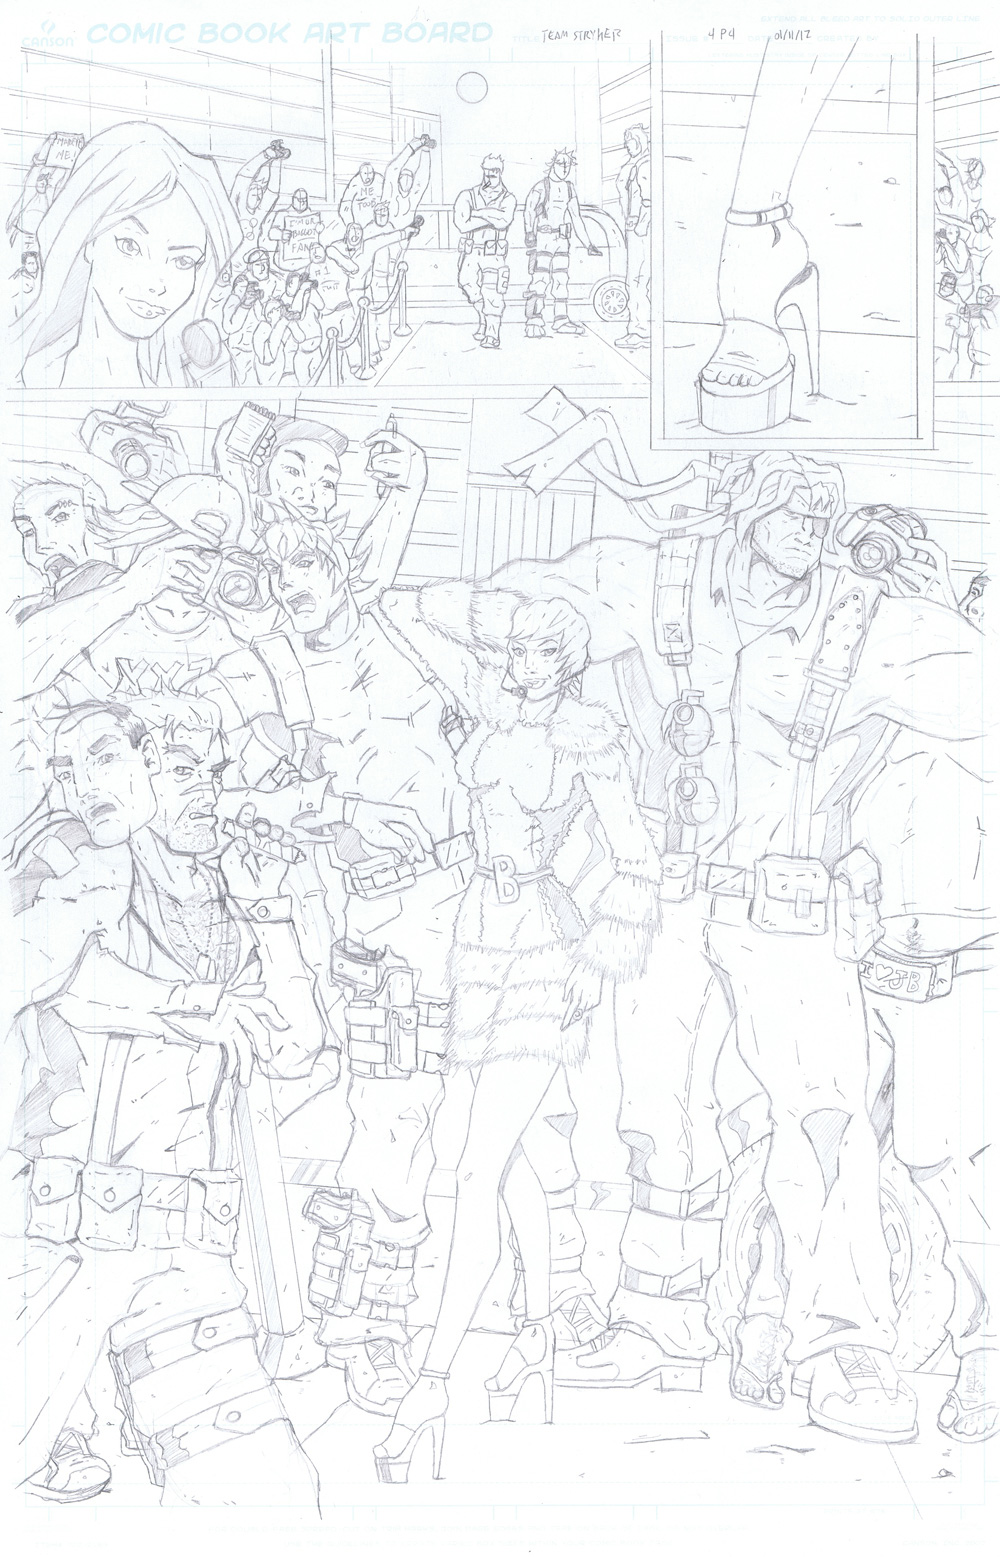 MISSION 004: PAGE 004 PENCIL